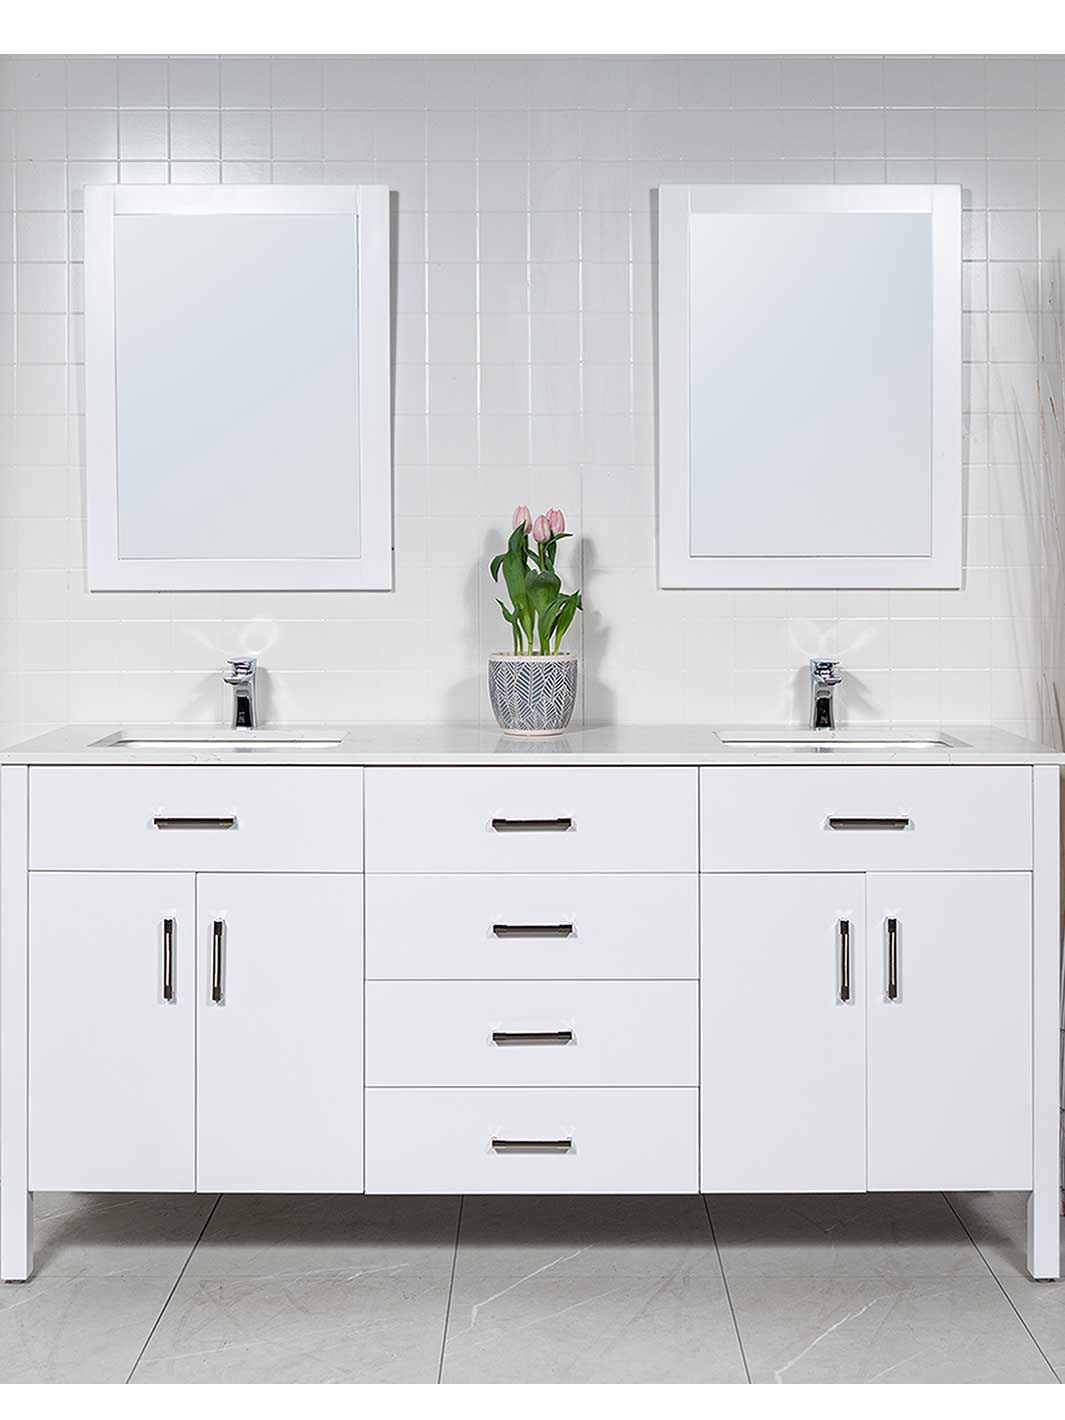 72 inch double vanity in white with two matching wood framed mirrors. chrome faucets